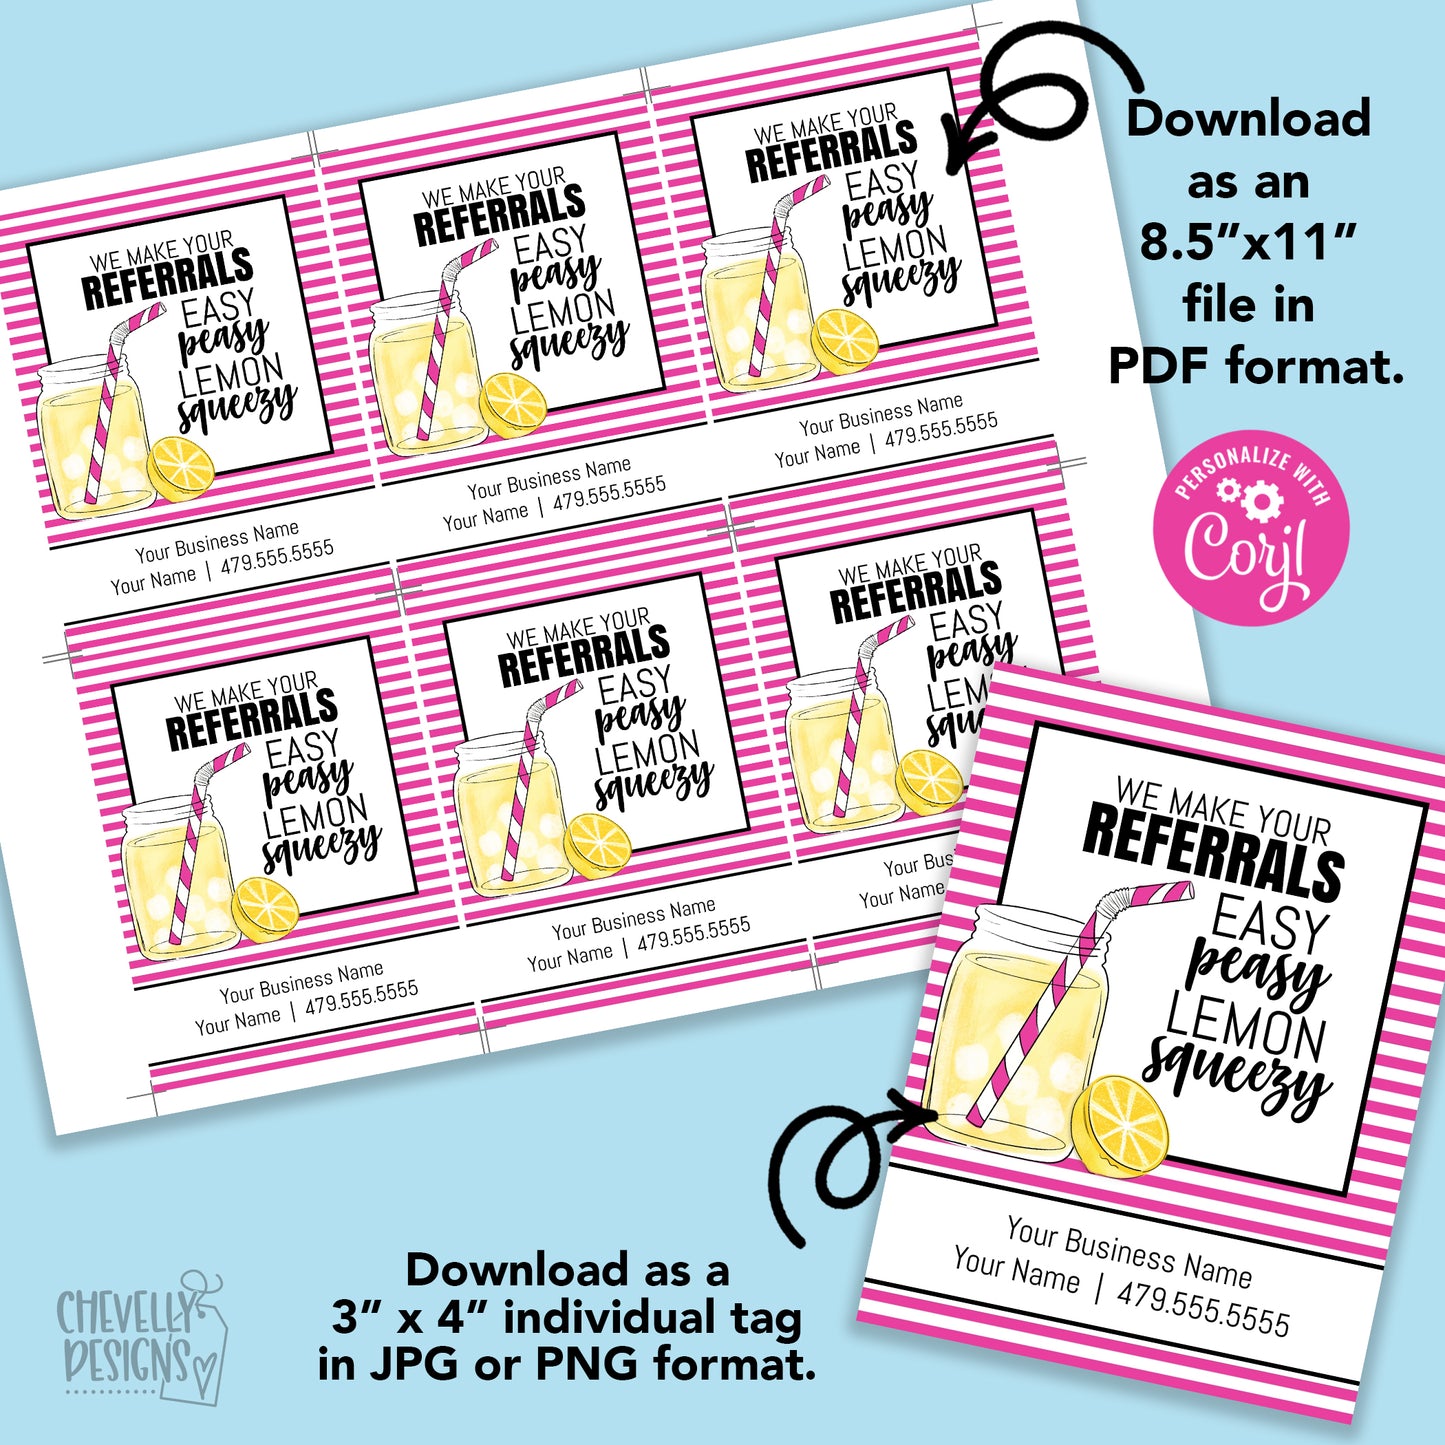 EDITABLE - We Make Your Referrals Easy Peasy Lemon Squeeze - Printable Business Marketing Tags